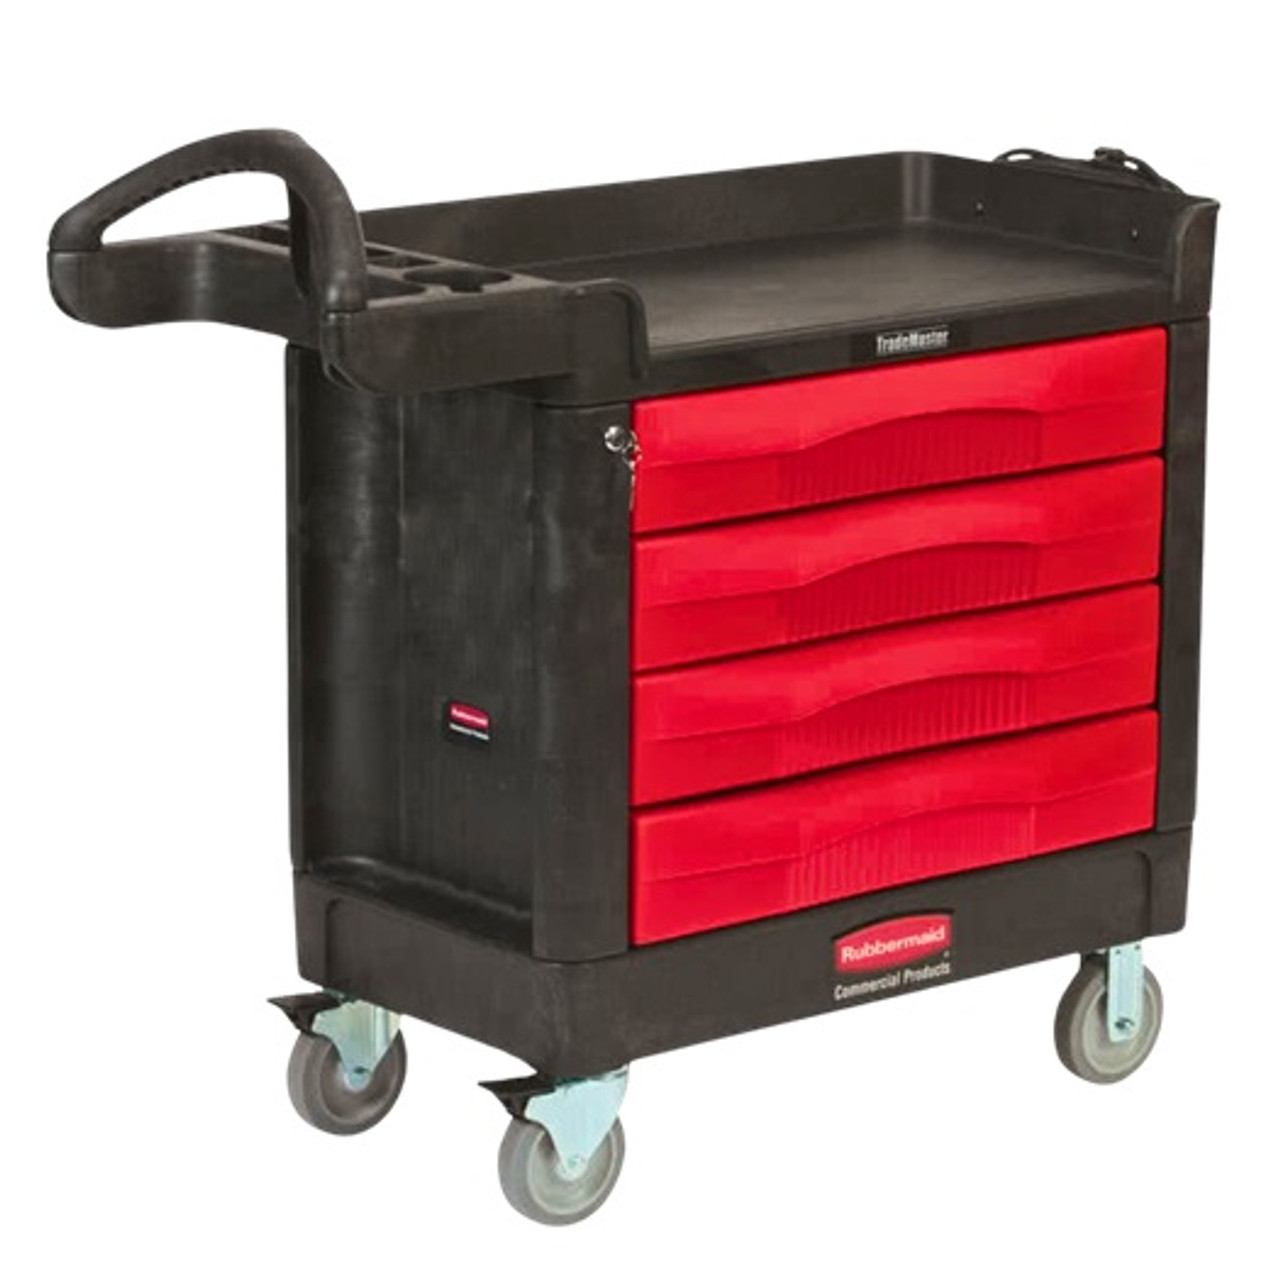 Rubbermaid 4513-88 TradeMaster Cart with 4 Drawers